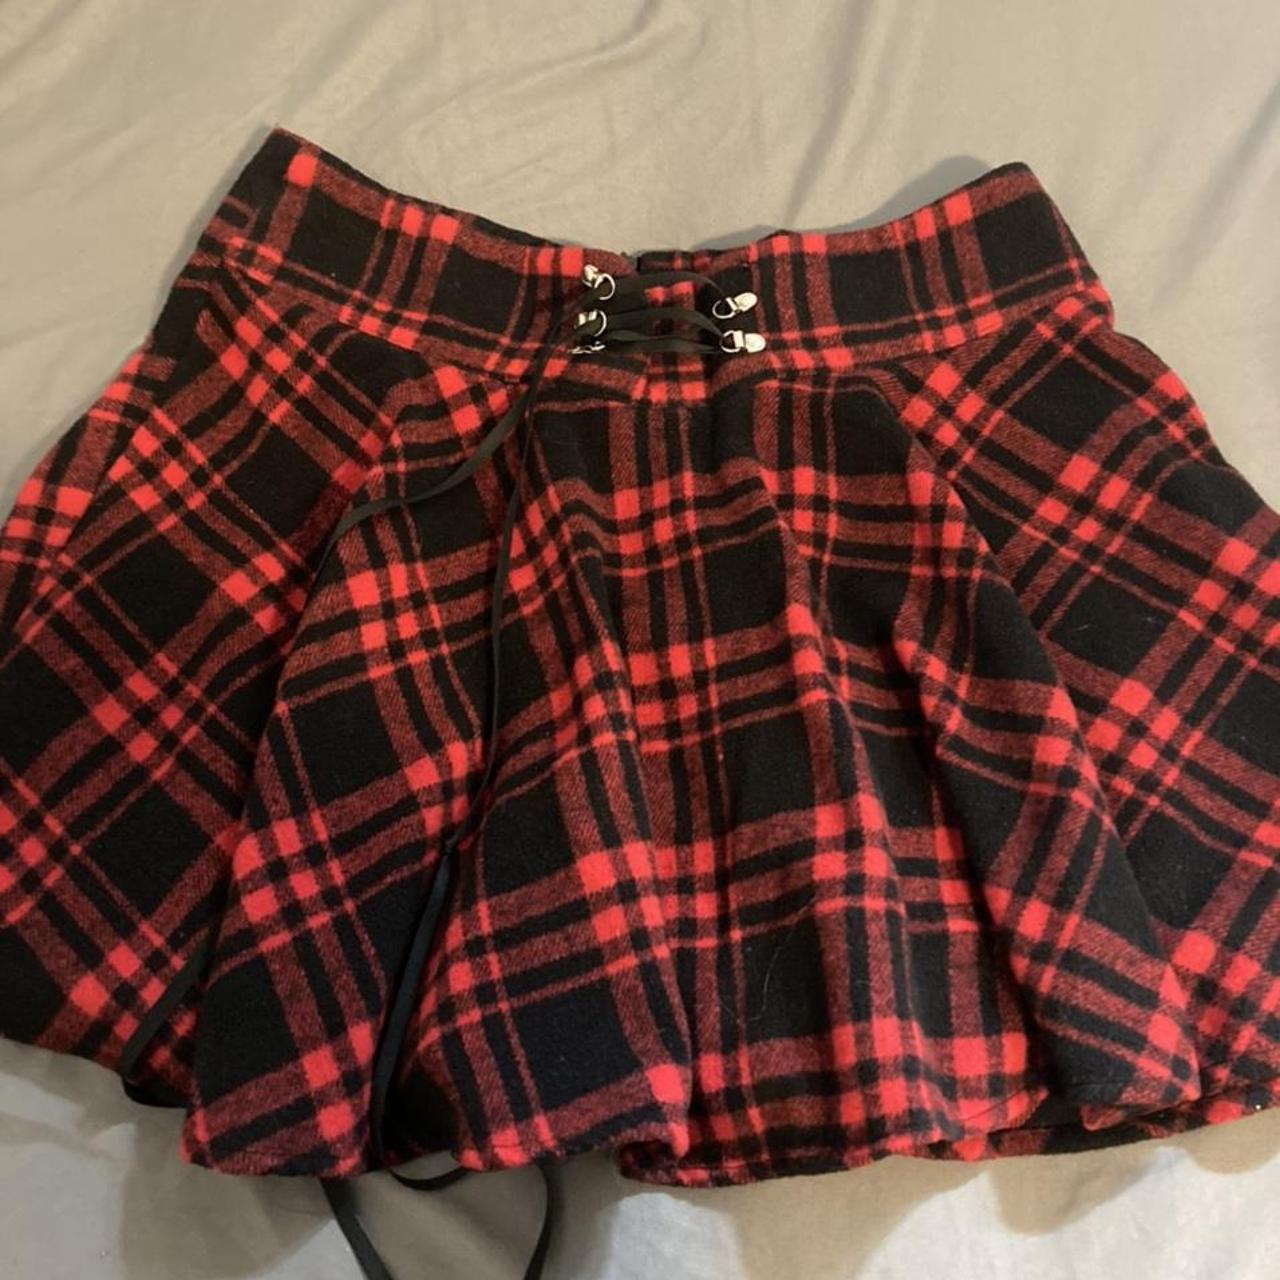 Awesome Goth Red plaid skirt! Size 3x 100% cotton - Depop